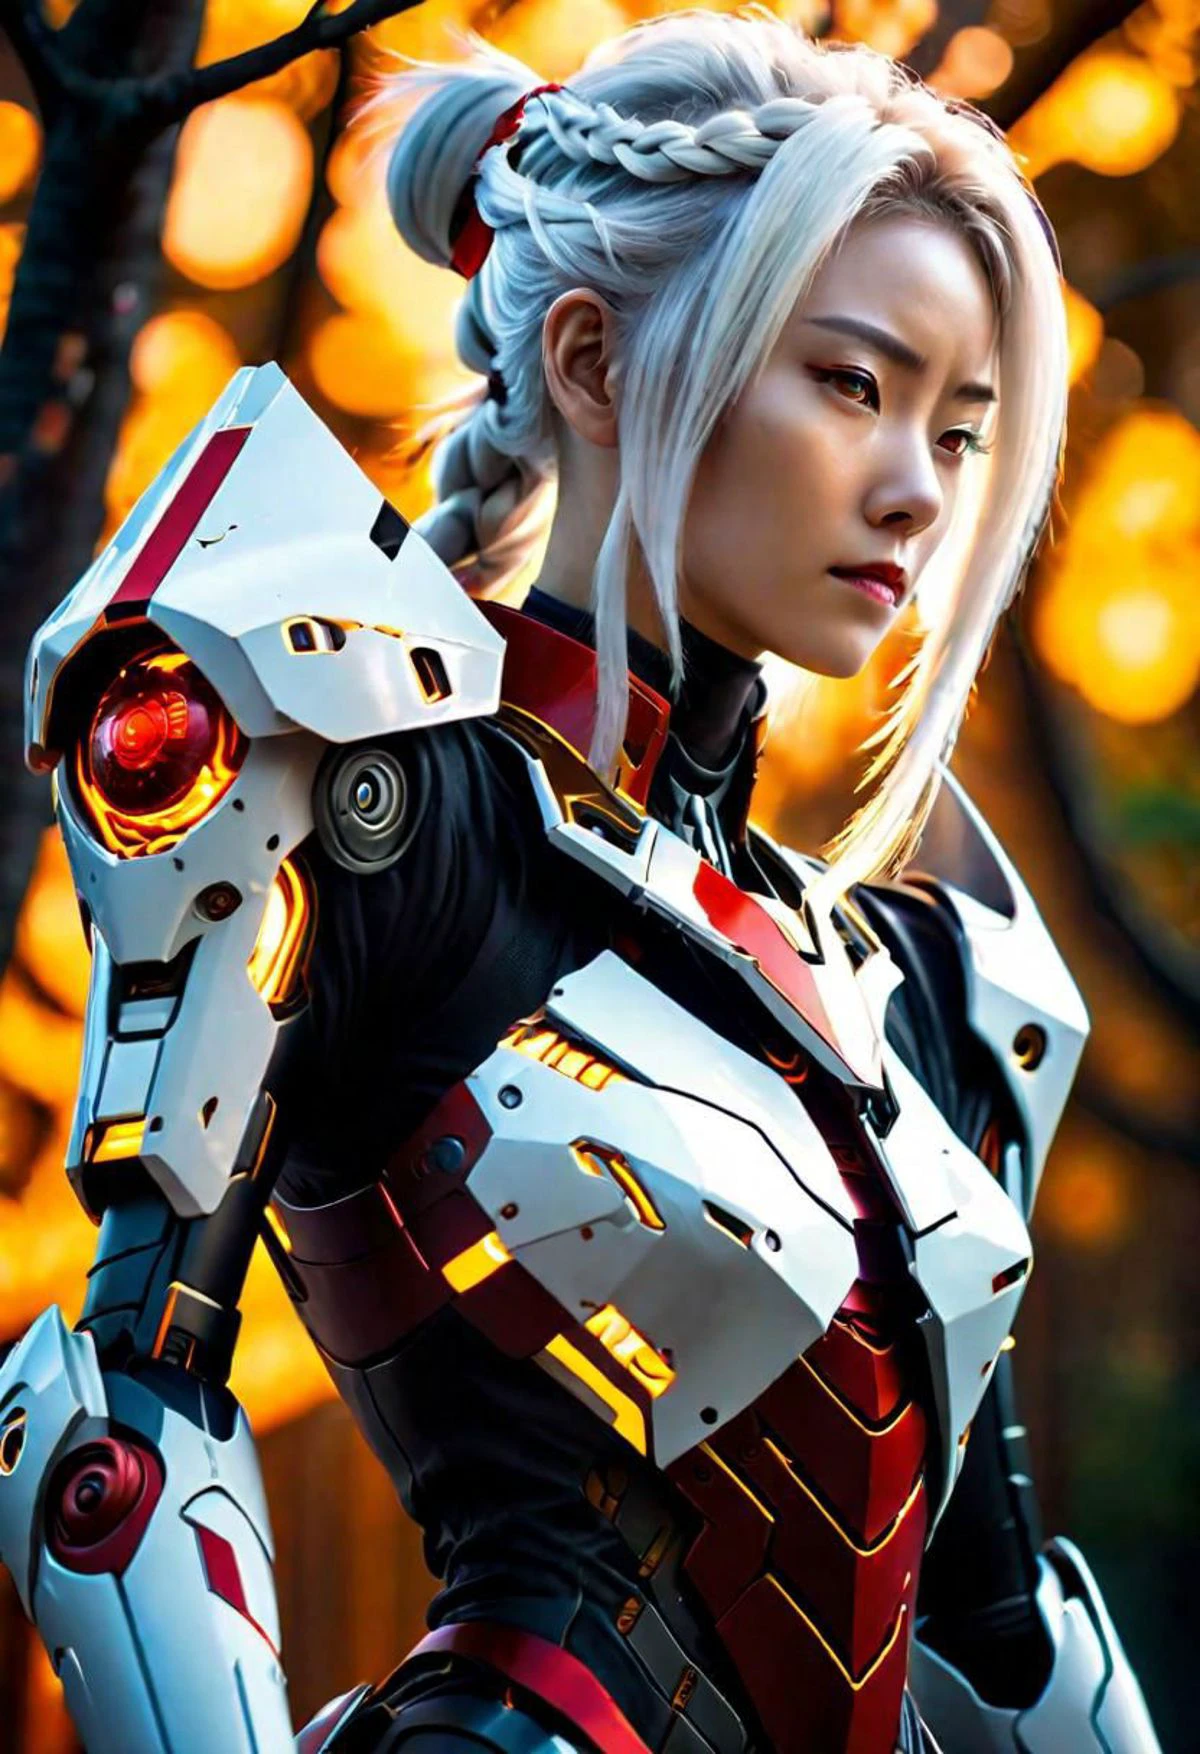 anime game, a beautiful woman with white face and white hair in a braid and red forehead ribbon, she is wearing a white futuristic darkness god radiance god mech armor burning and smoking destroyed radiance boss golden Titan Cyberpunk Venom Evangelion mech wreck with red trim, she is standing, sunlit, weak lights and shadows, tree canopy